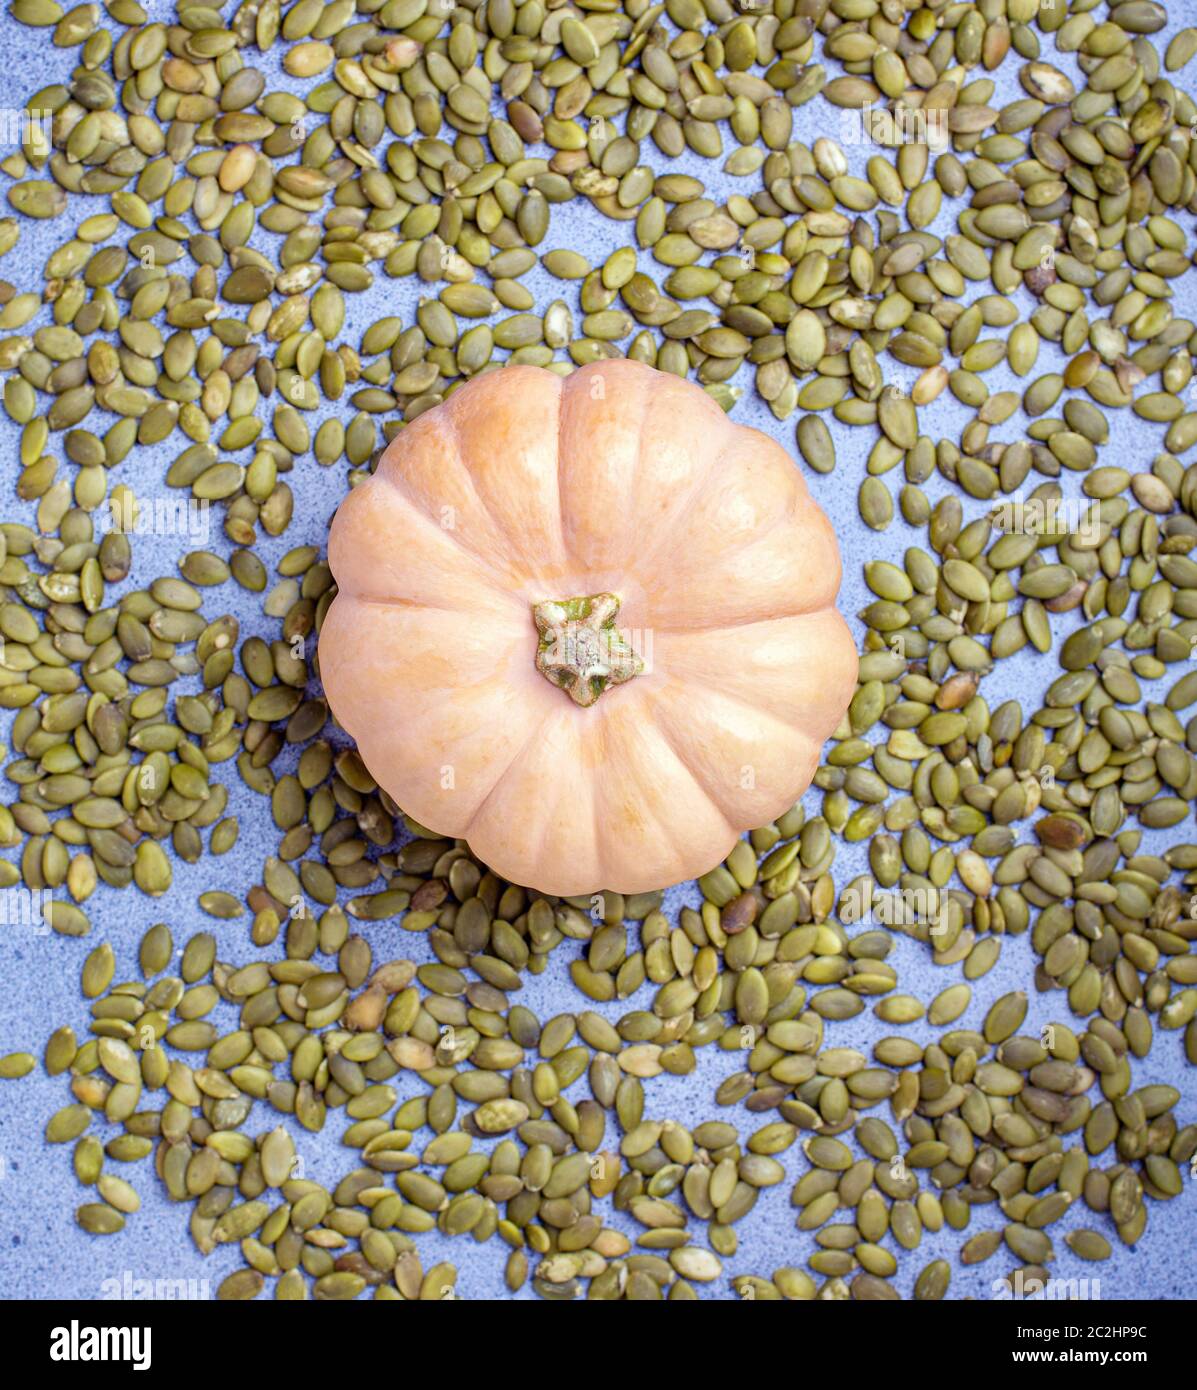 Ripe pumpkin on scattered seeds. Stock Photo